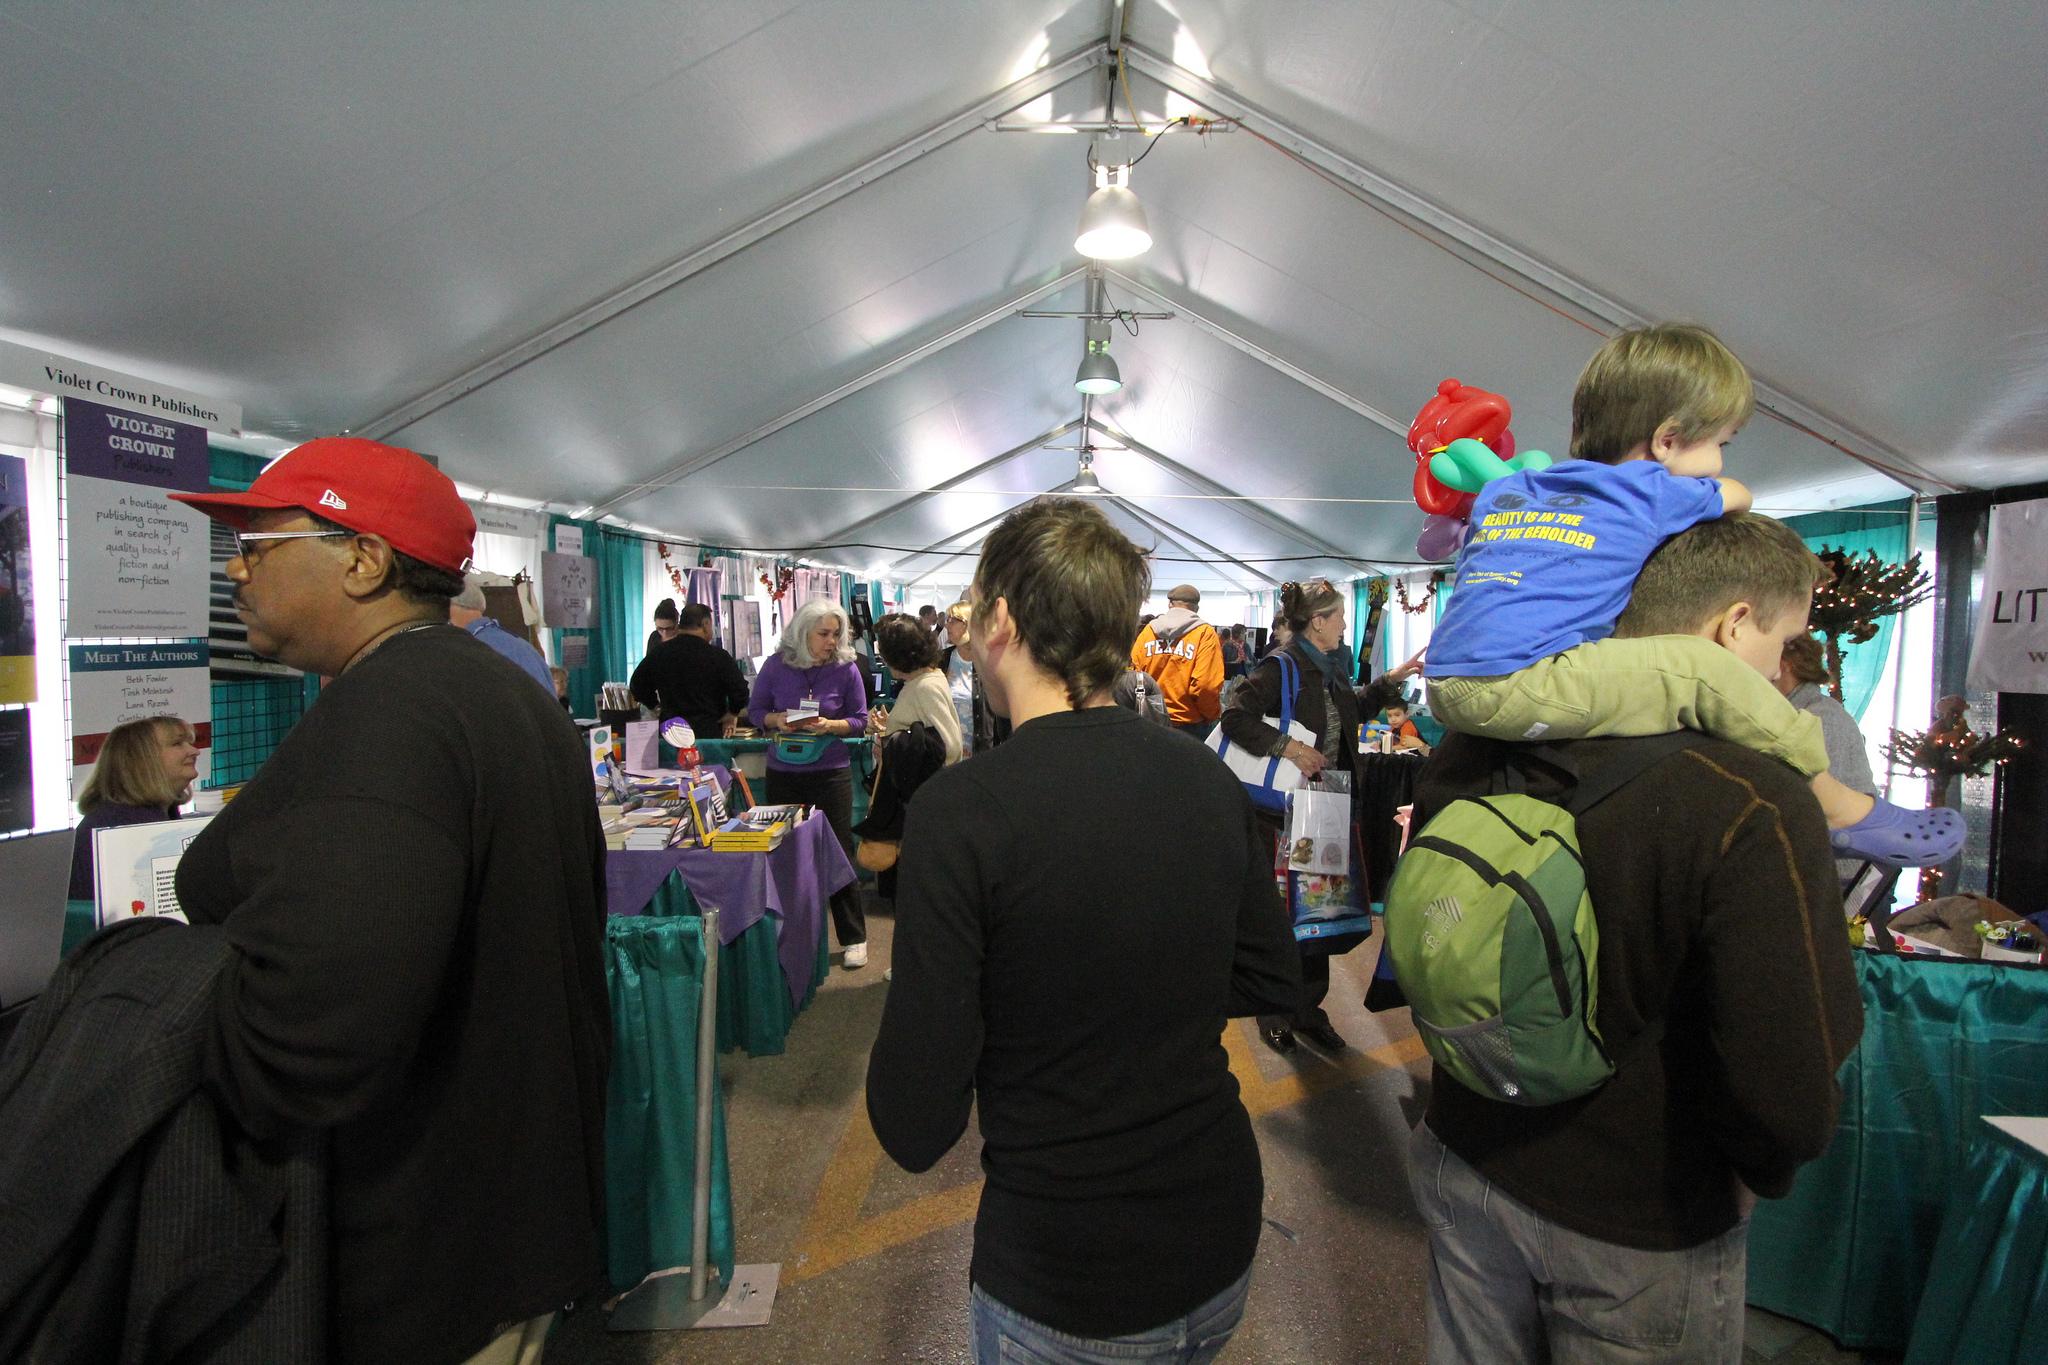 Vistors stroll through one of the outside tents at the 2012 Texas Book Festival
Texas State Library and Archives Commission